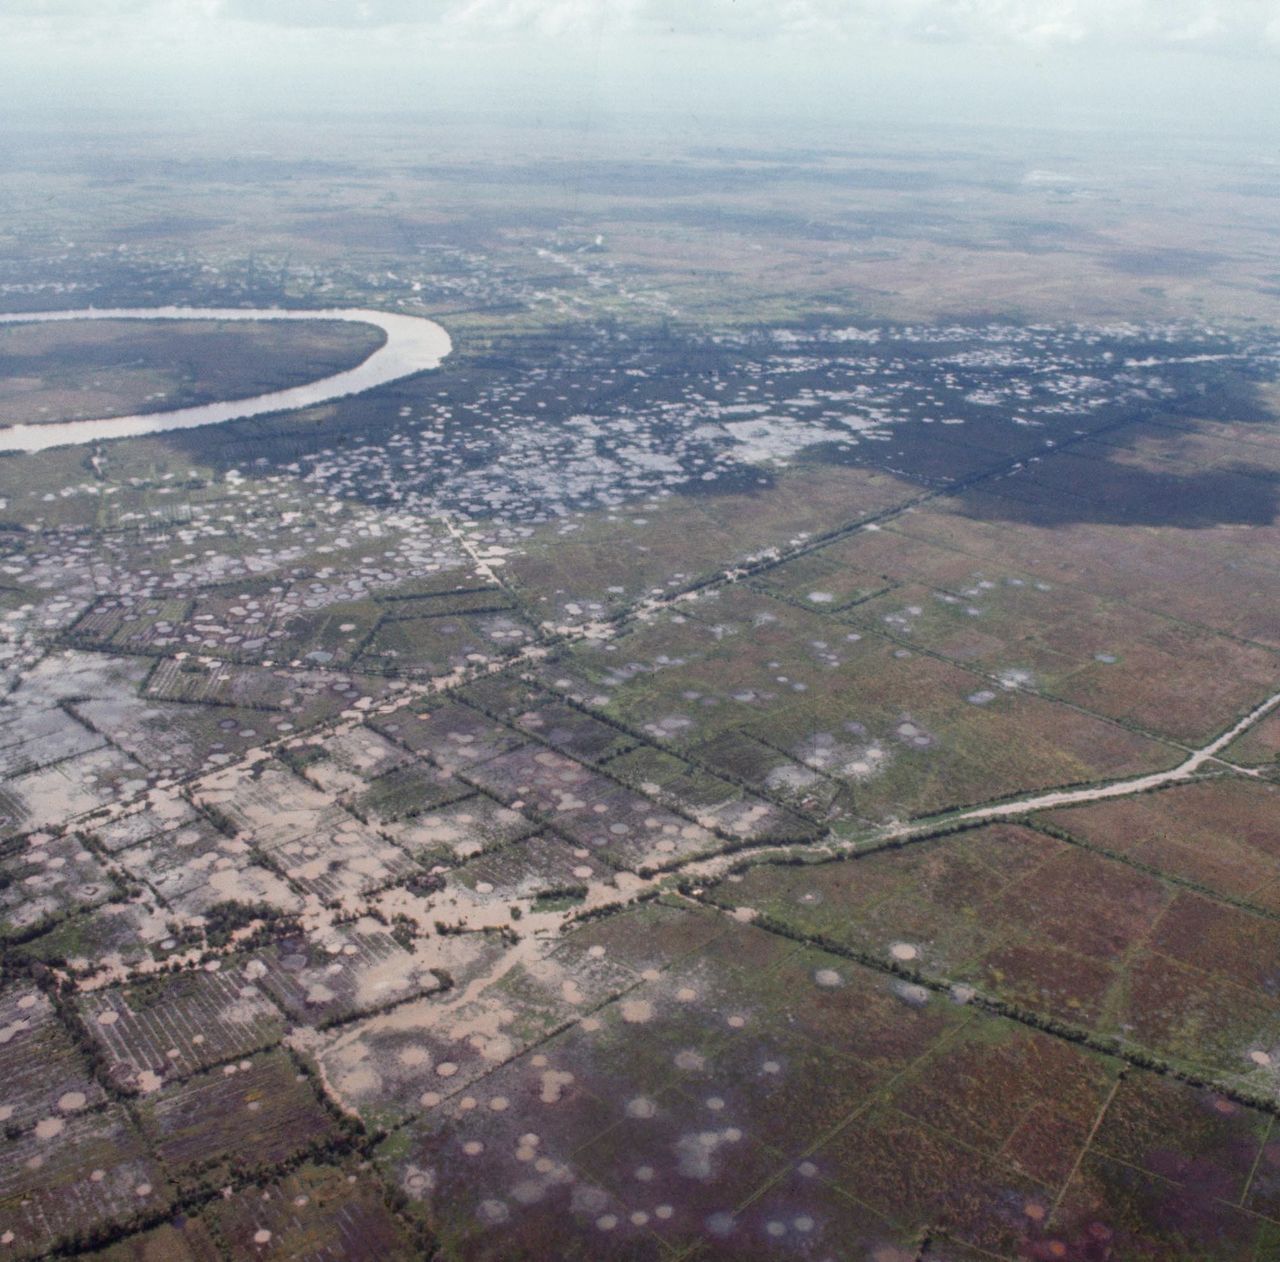 The Cambodian landscape in 1968 shows the damage inflicted by B-52 bombing there.